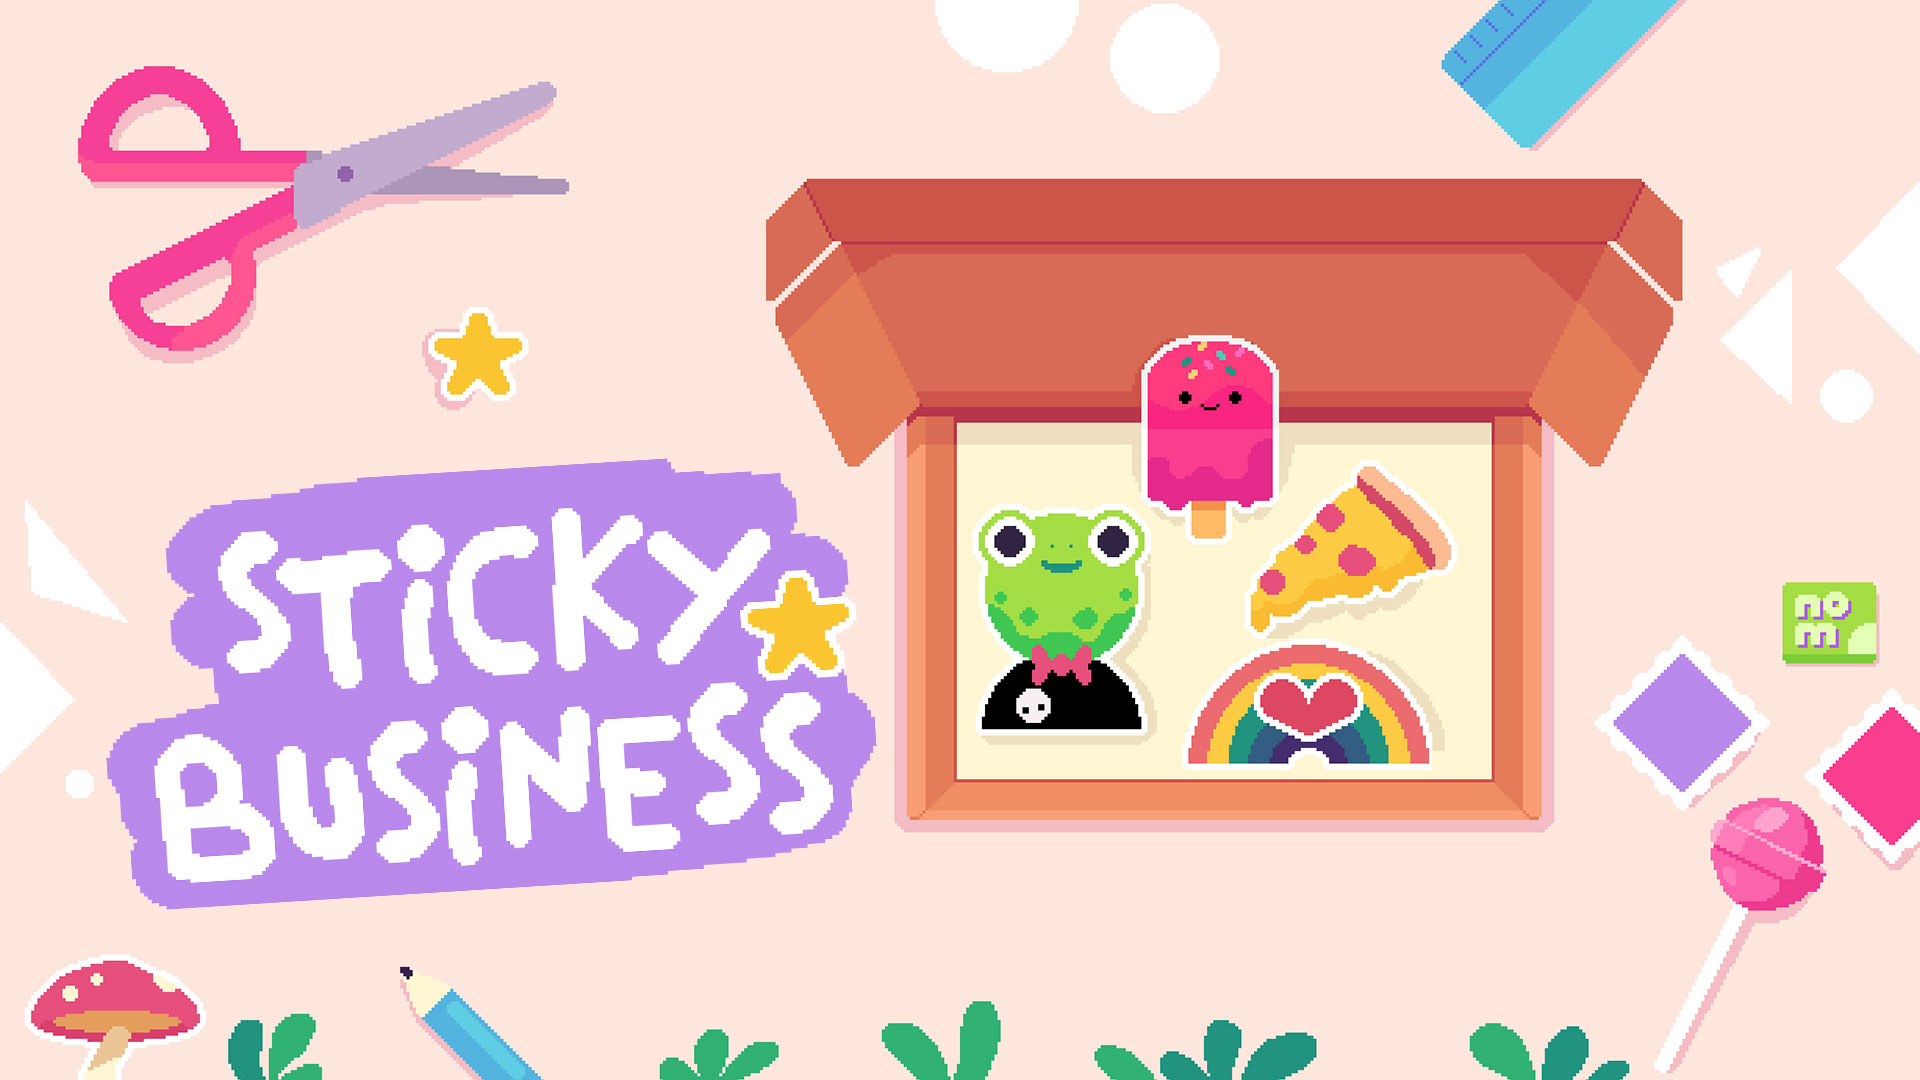 Sticky Business from Spellgarden Games and Assemble Entertainment